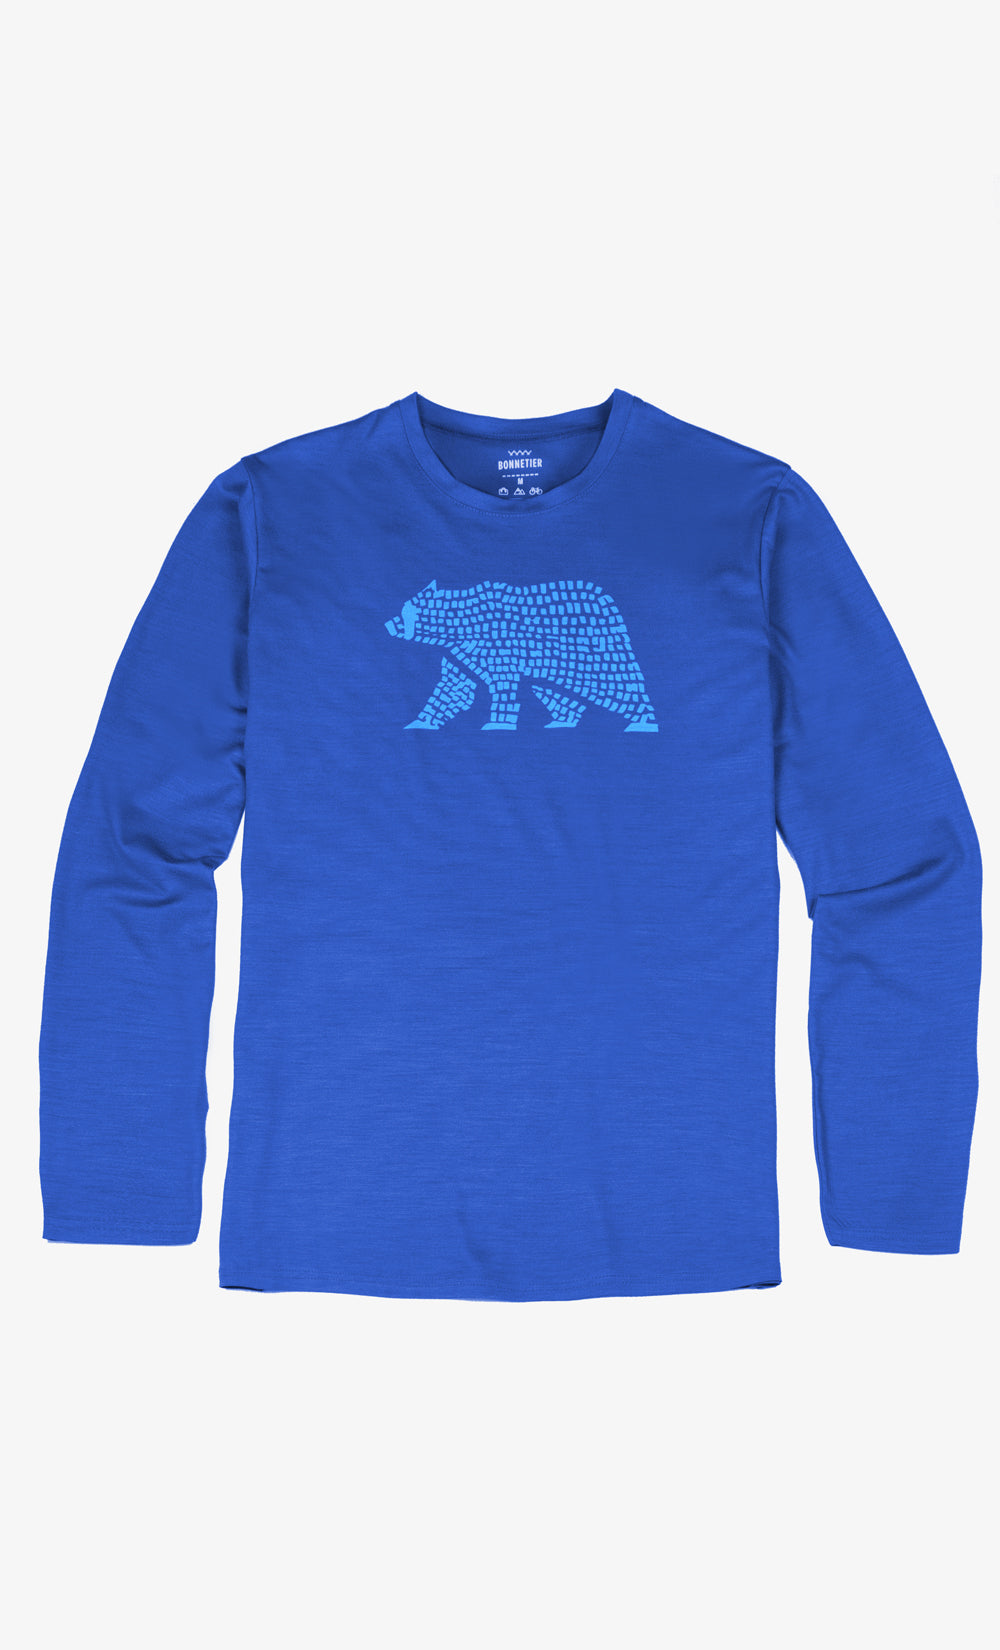 Royal Blue Men's Long Sleeve top - Ours